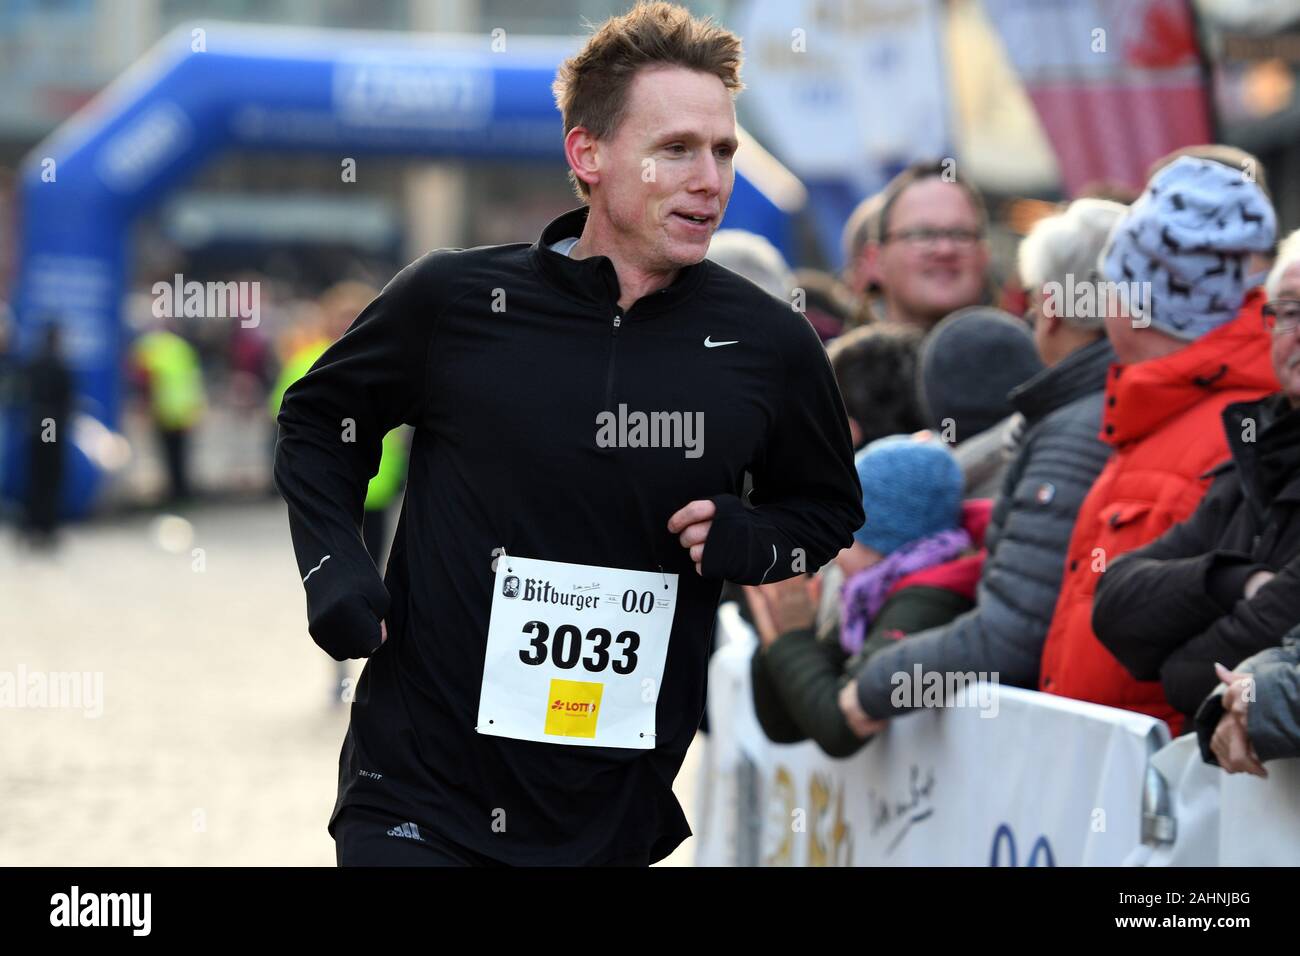 Trier, Germany. 31st Dec, 2019. International New Year's Eve run in Trier,  endurance race, VIP run over 3 km: Frank Busemann, former top athlete in  the decathlon, runs on the track. The